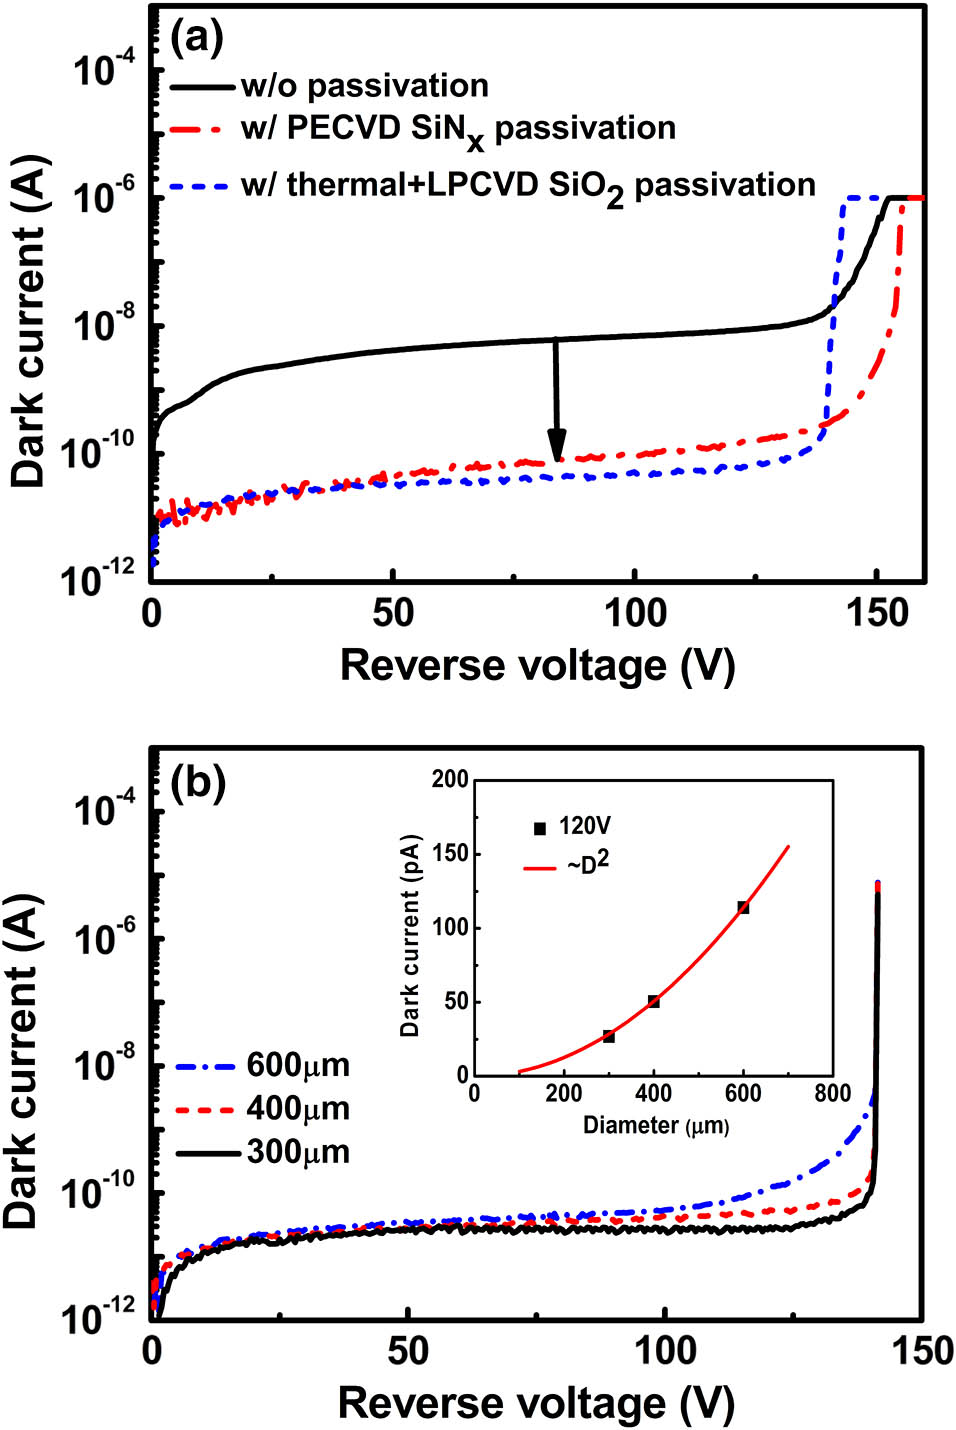 Dark current of fabricated large-area 4H-SiC APDs. (a) Comparison of dark current with and without passivation; (b) dark current of fabricated APDs with various sizes.